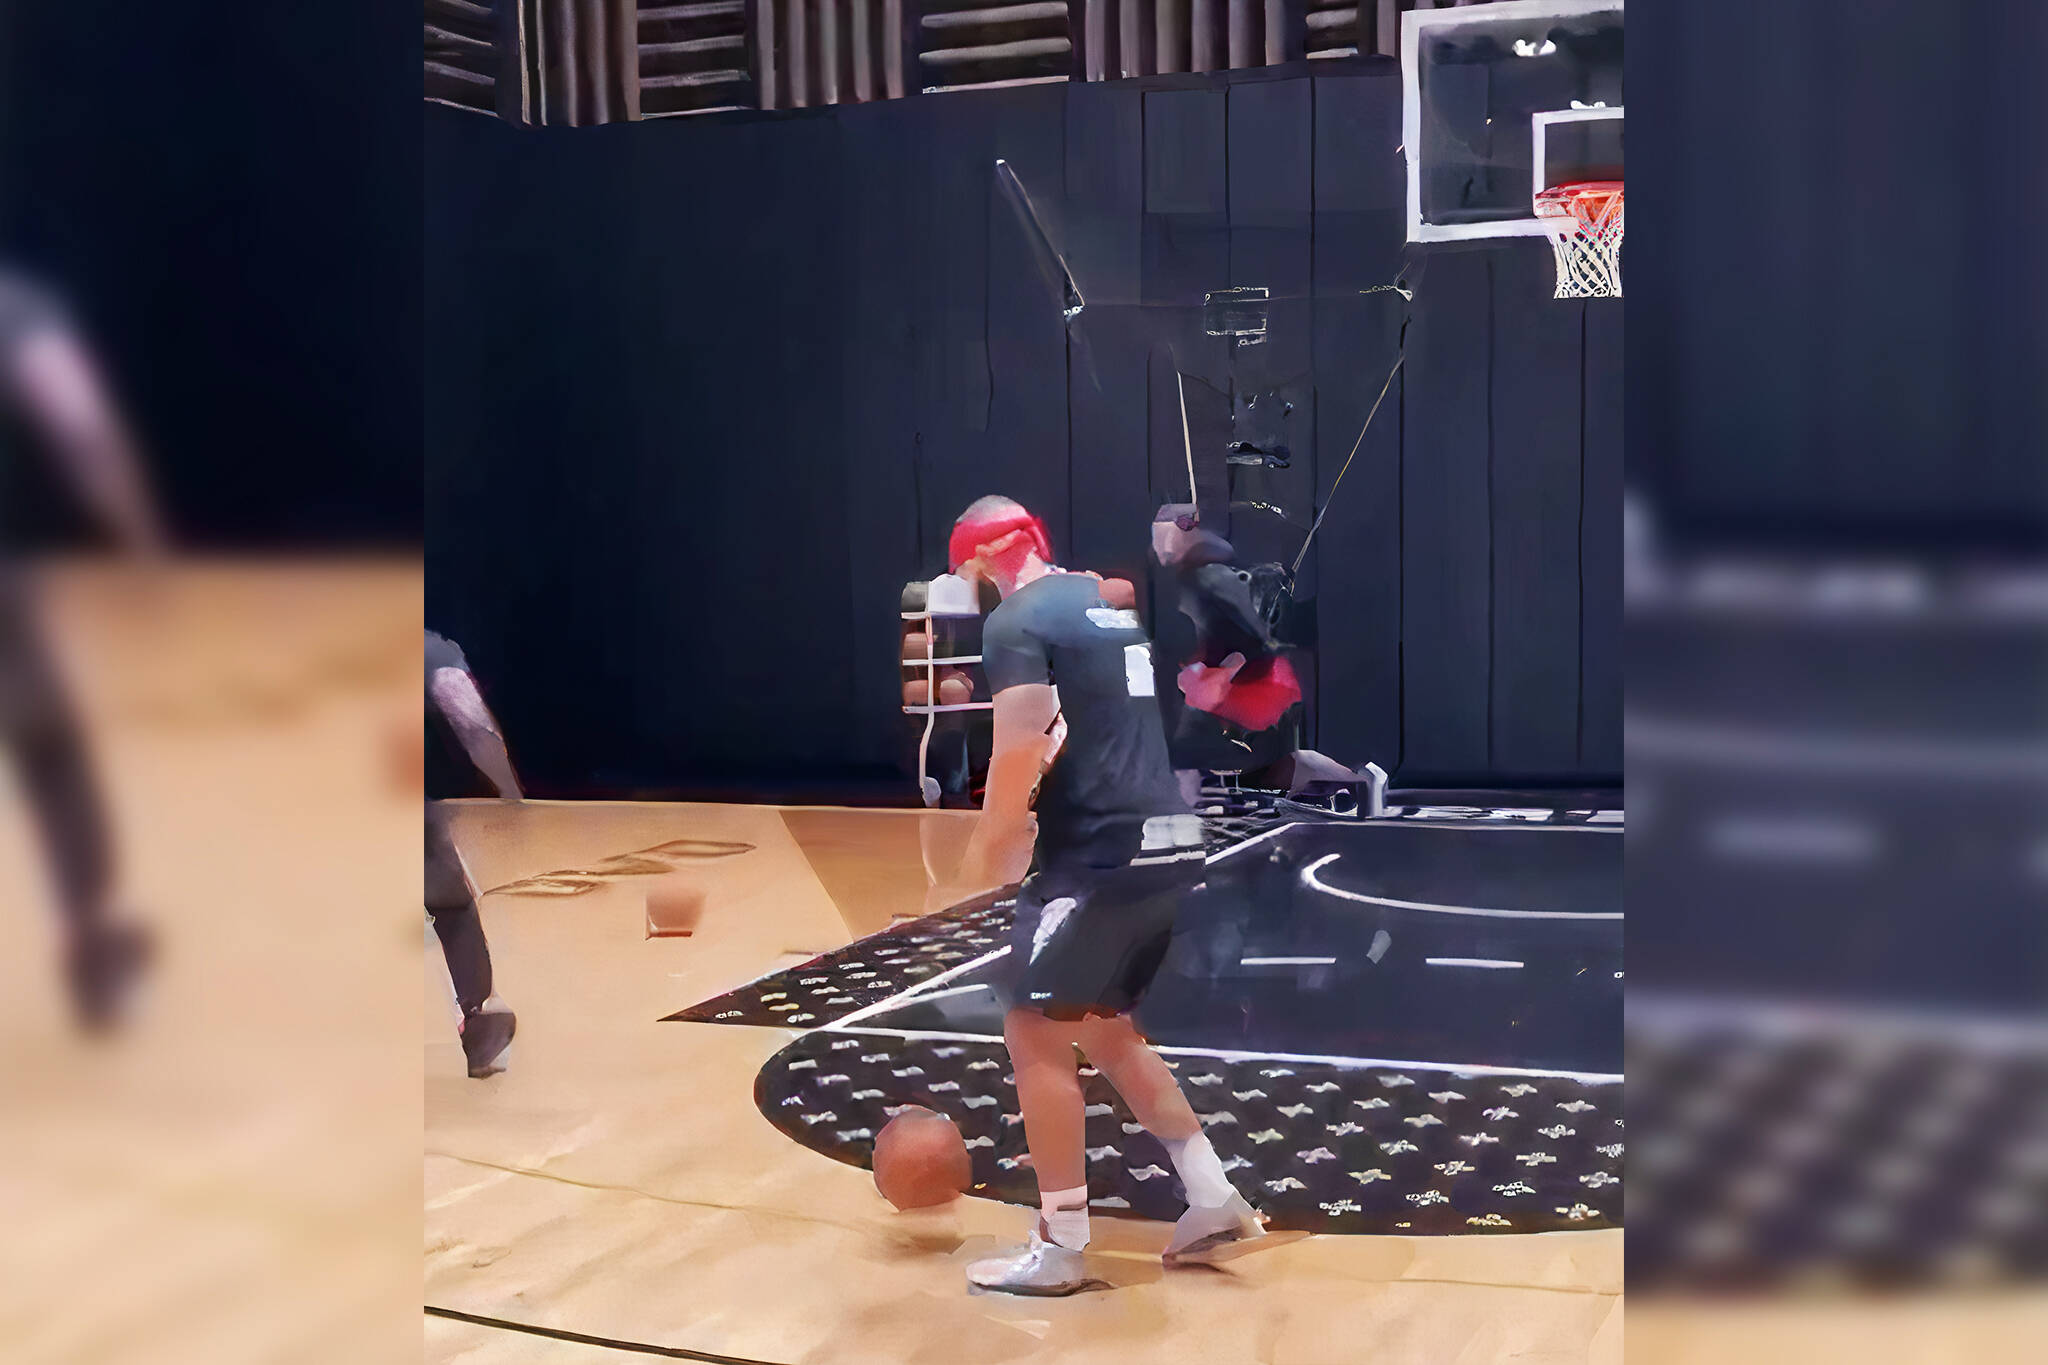 Drake hosts Steph Curry for private shootout at his home court